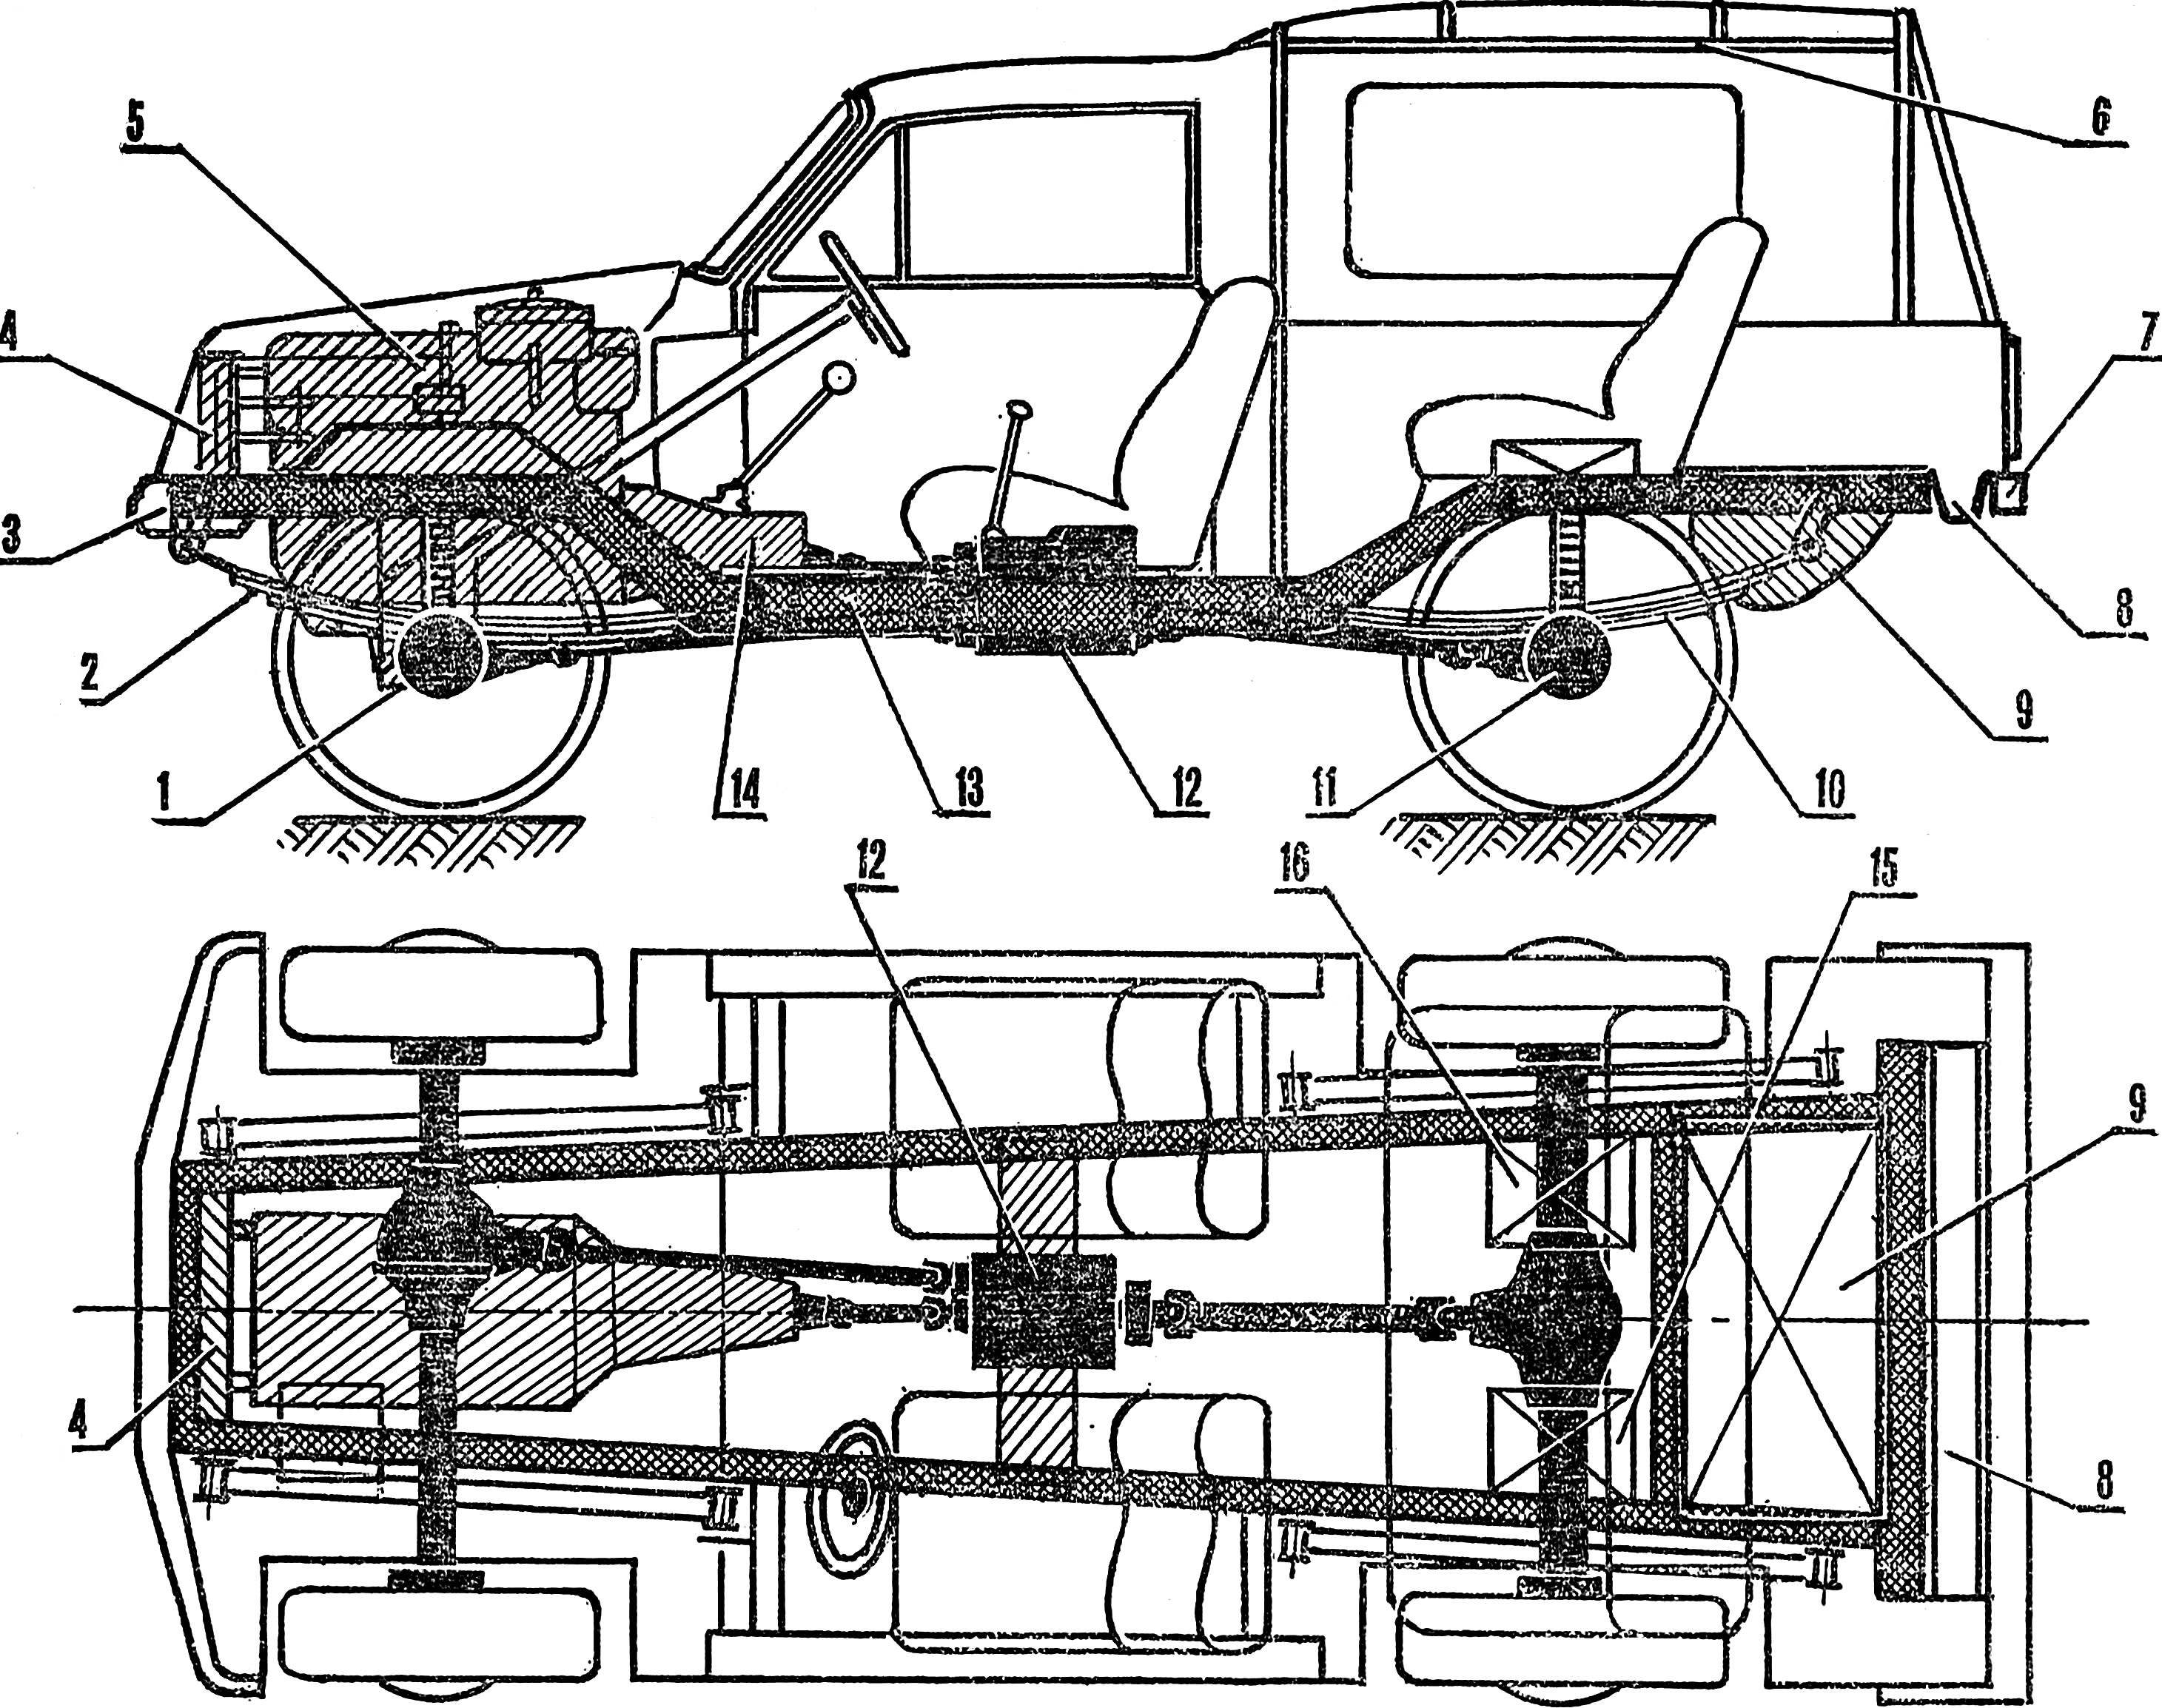 Fig. 2. The layout of the car.